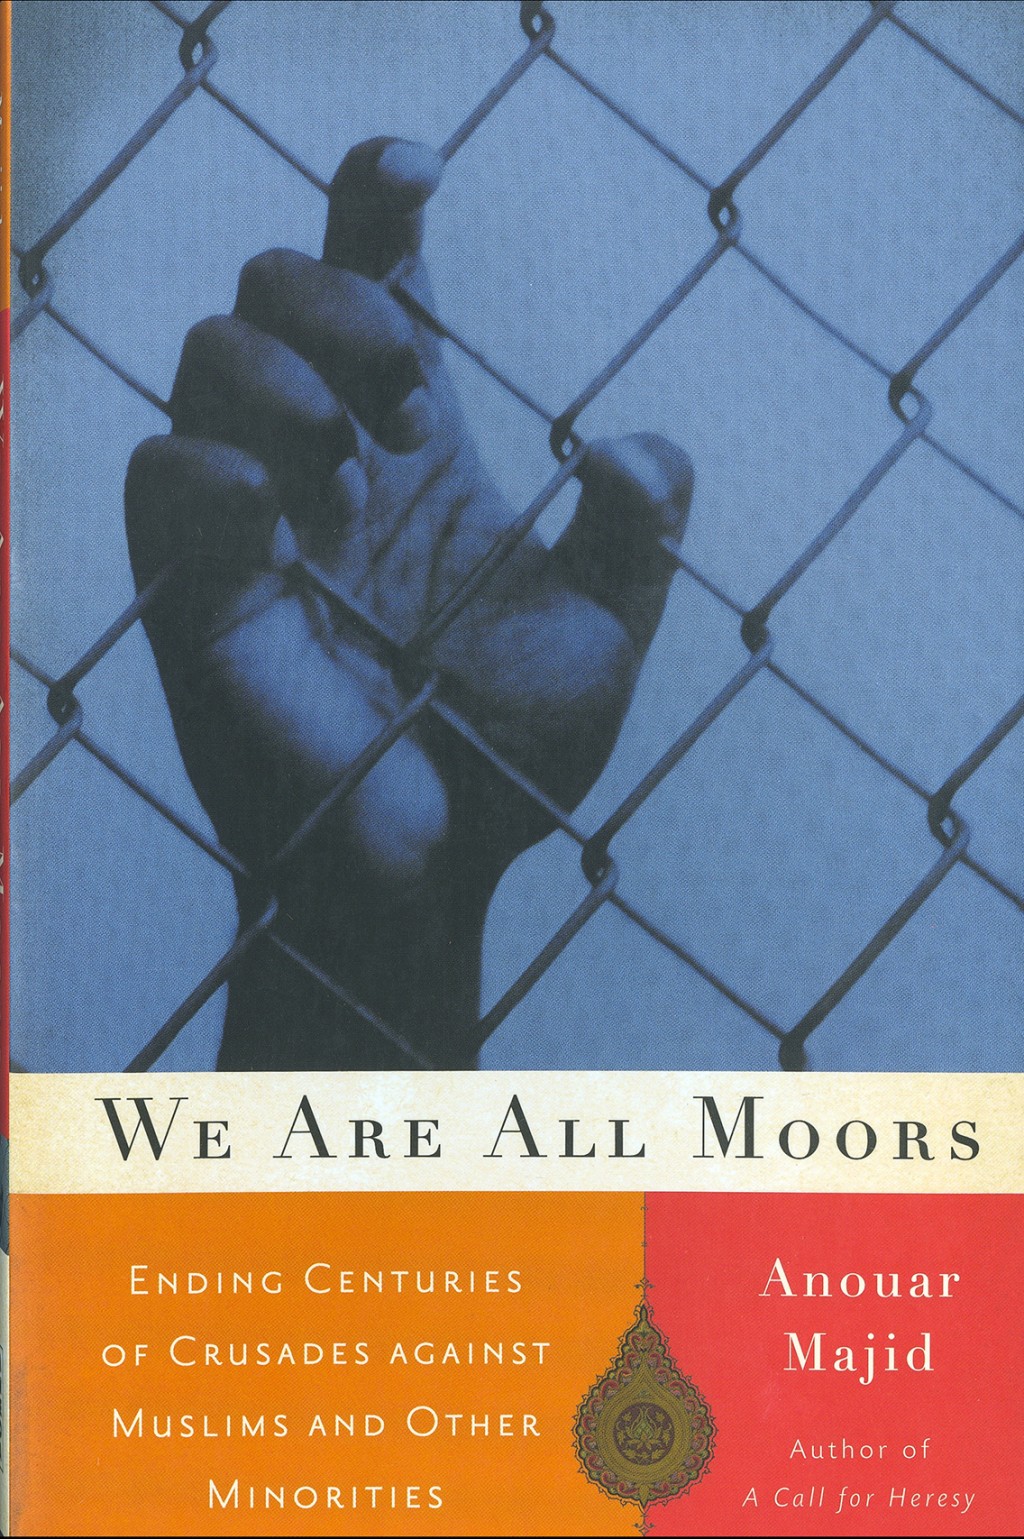 "We Are All Moors" book cover in English